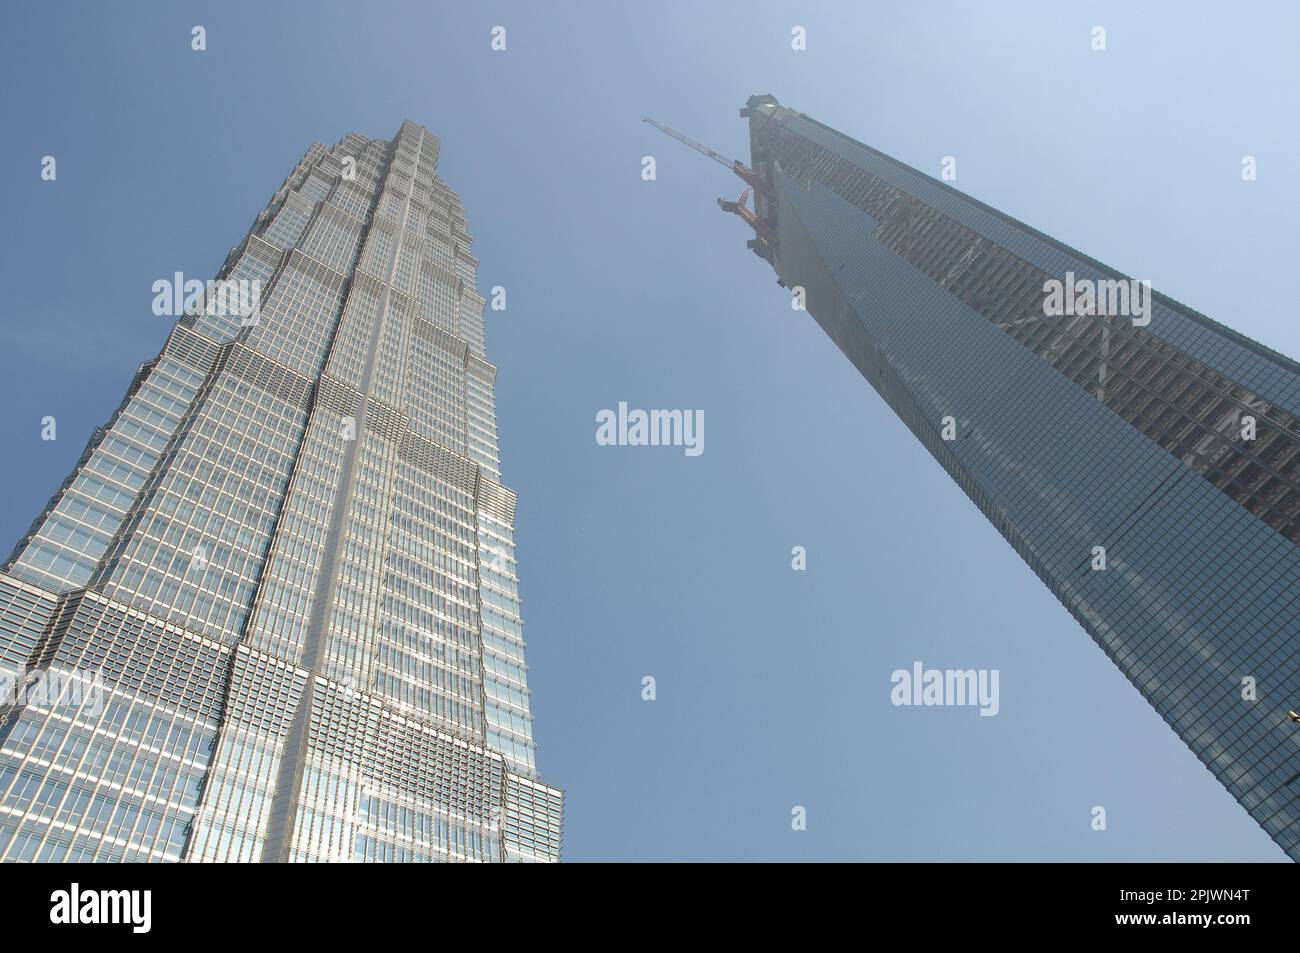 Pudong district, the financial heart of China. Shanghai, China, Asia Stock Photo